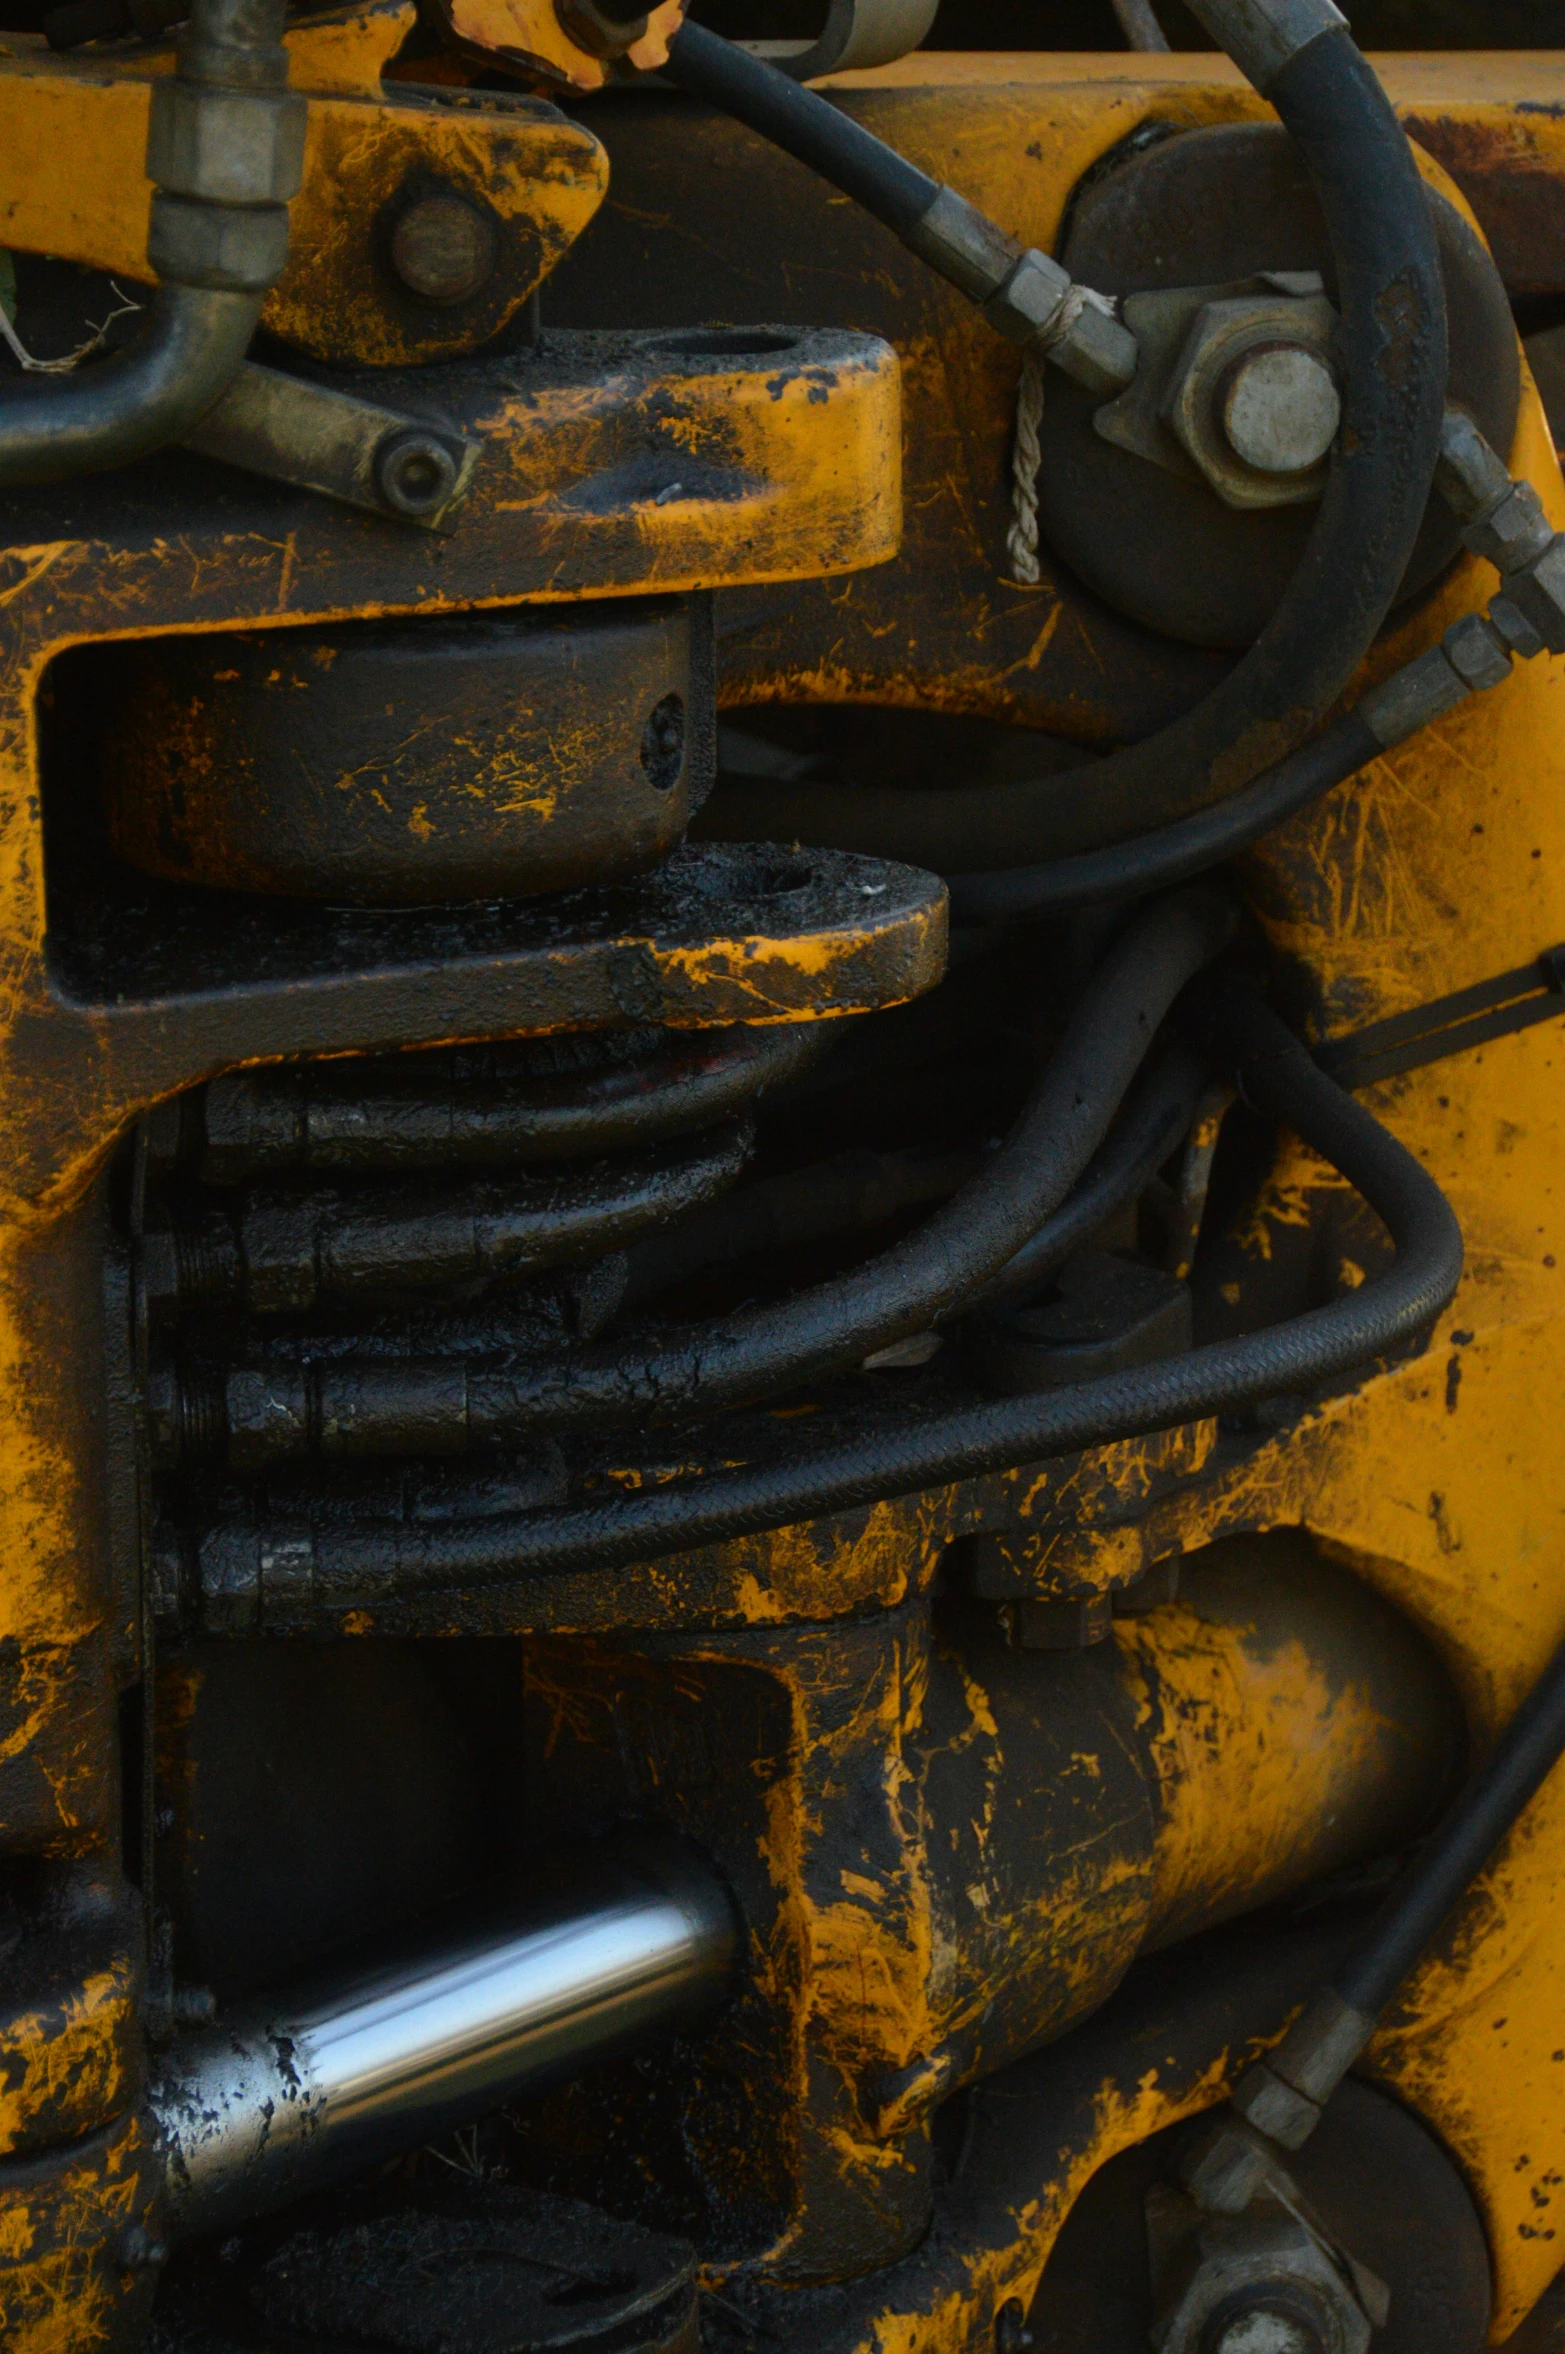 a view of the back end of a construction machine